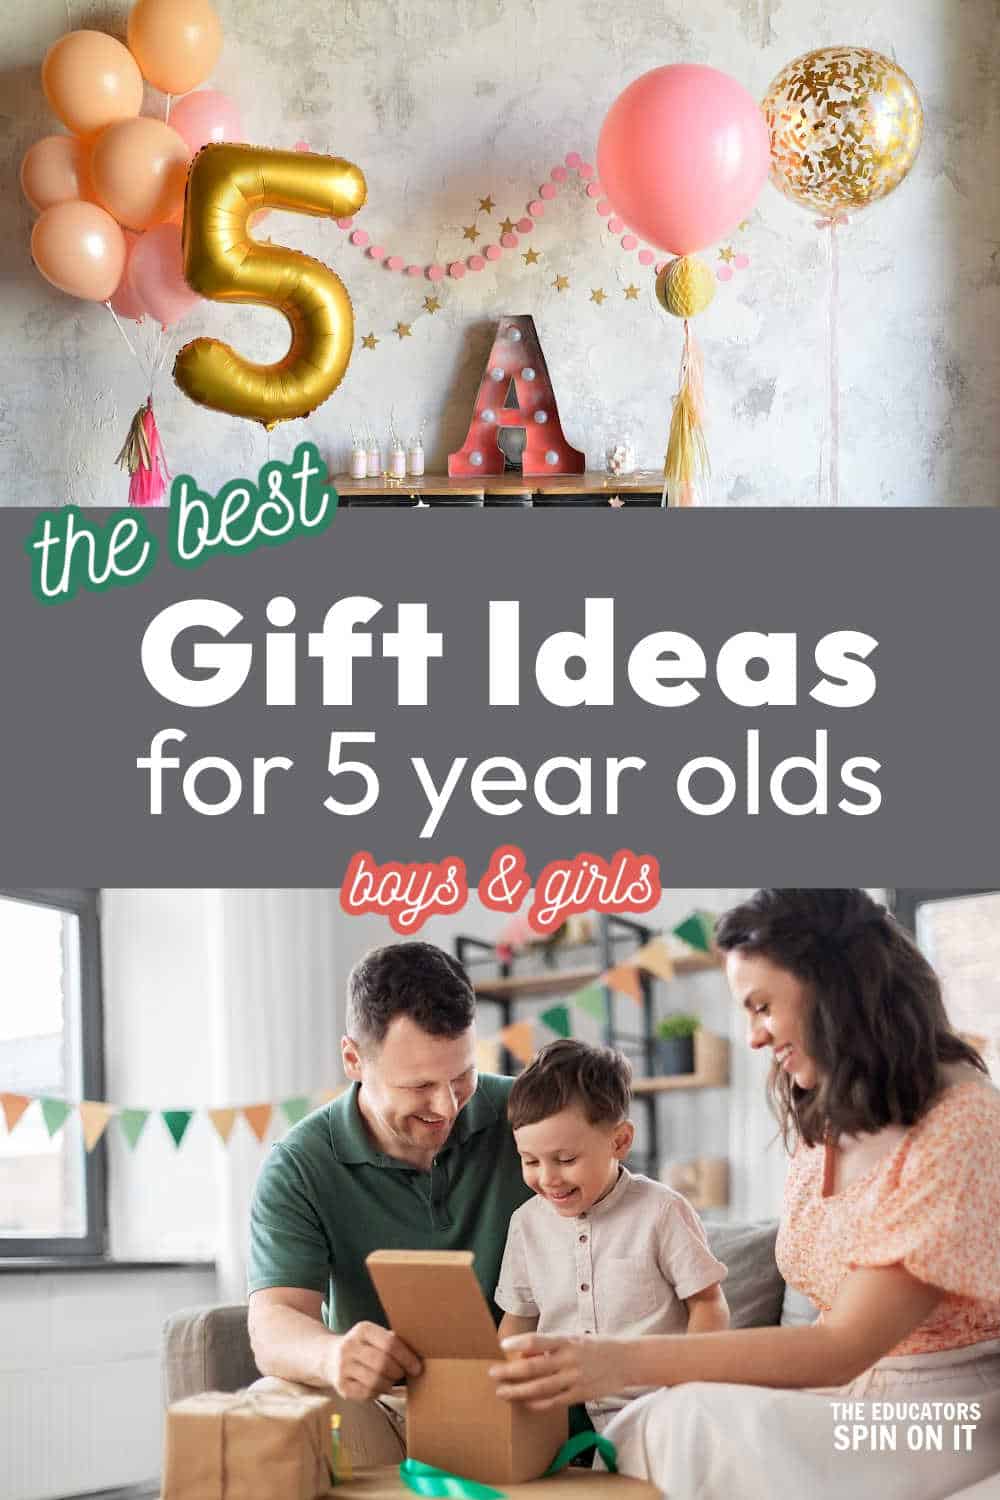 5 Year Old Gift Ideas - The Educators' Spin On It